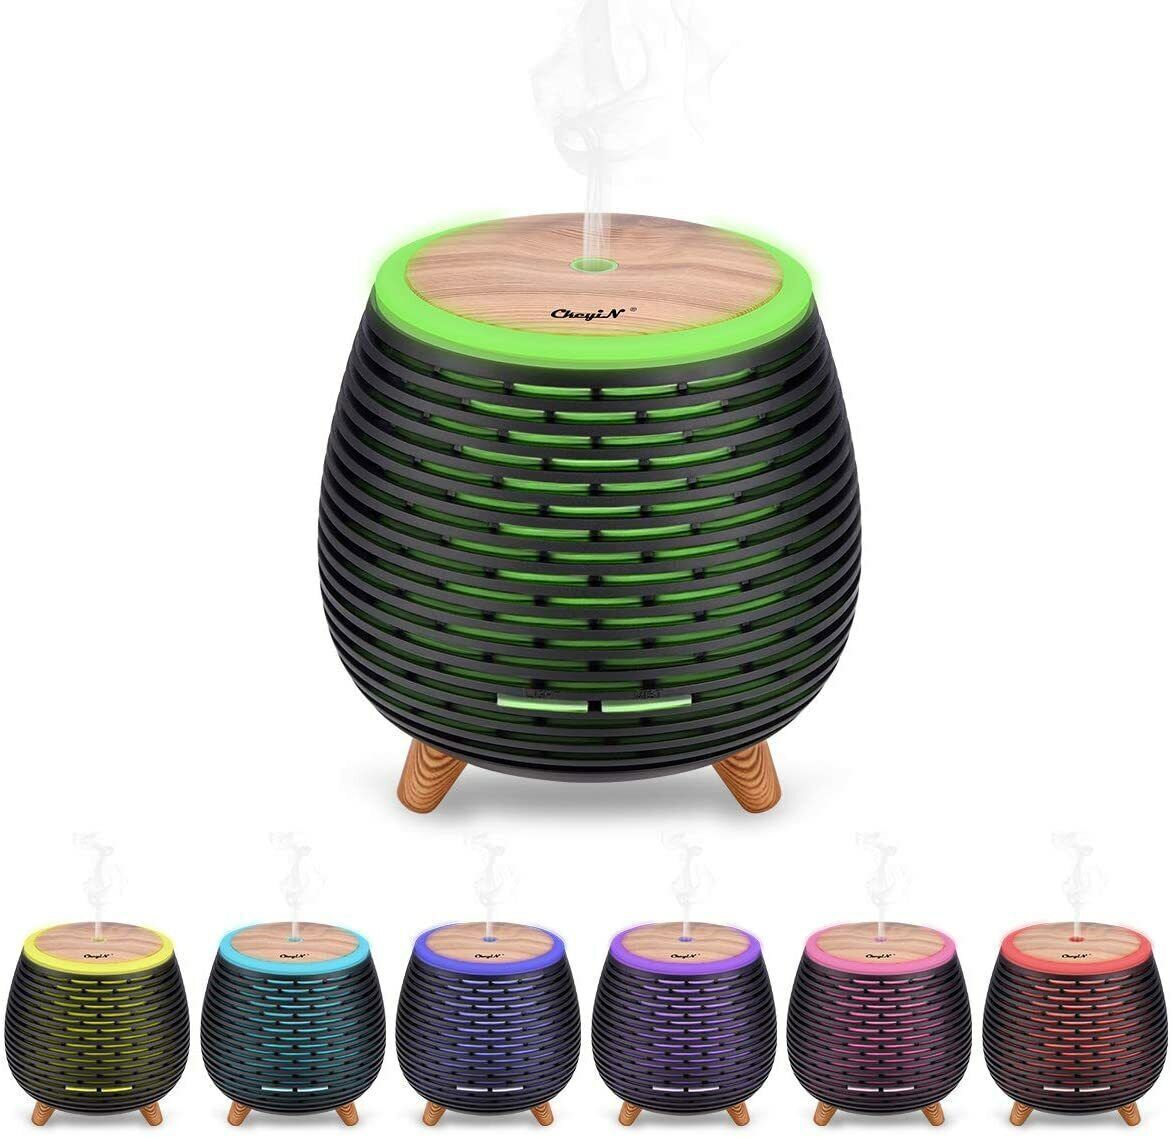 A range of colorful Mini Oil Diffuser SpyCams emitting vapor displayed against a white background.